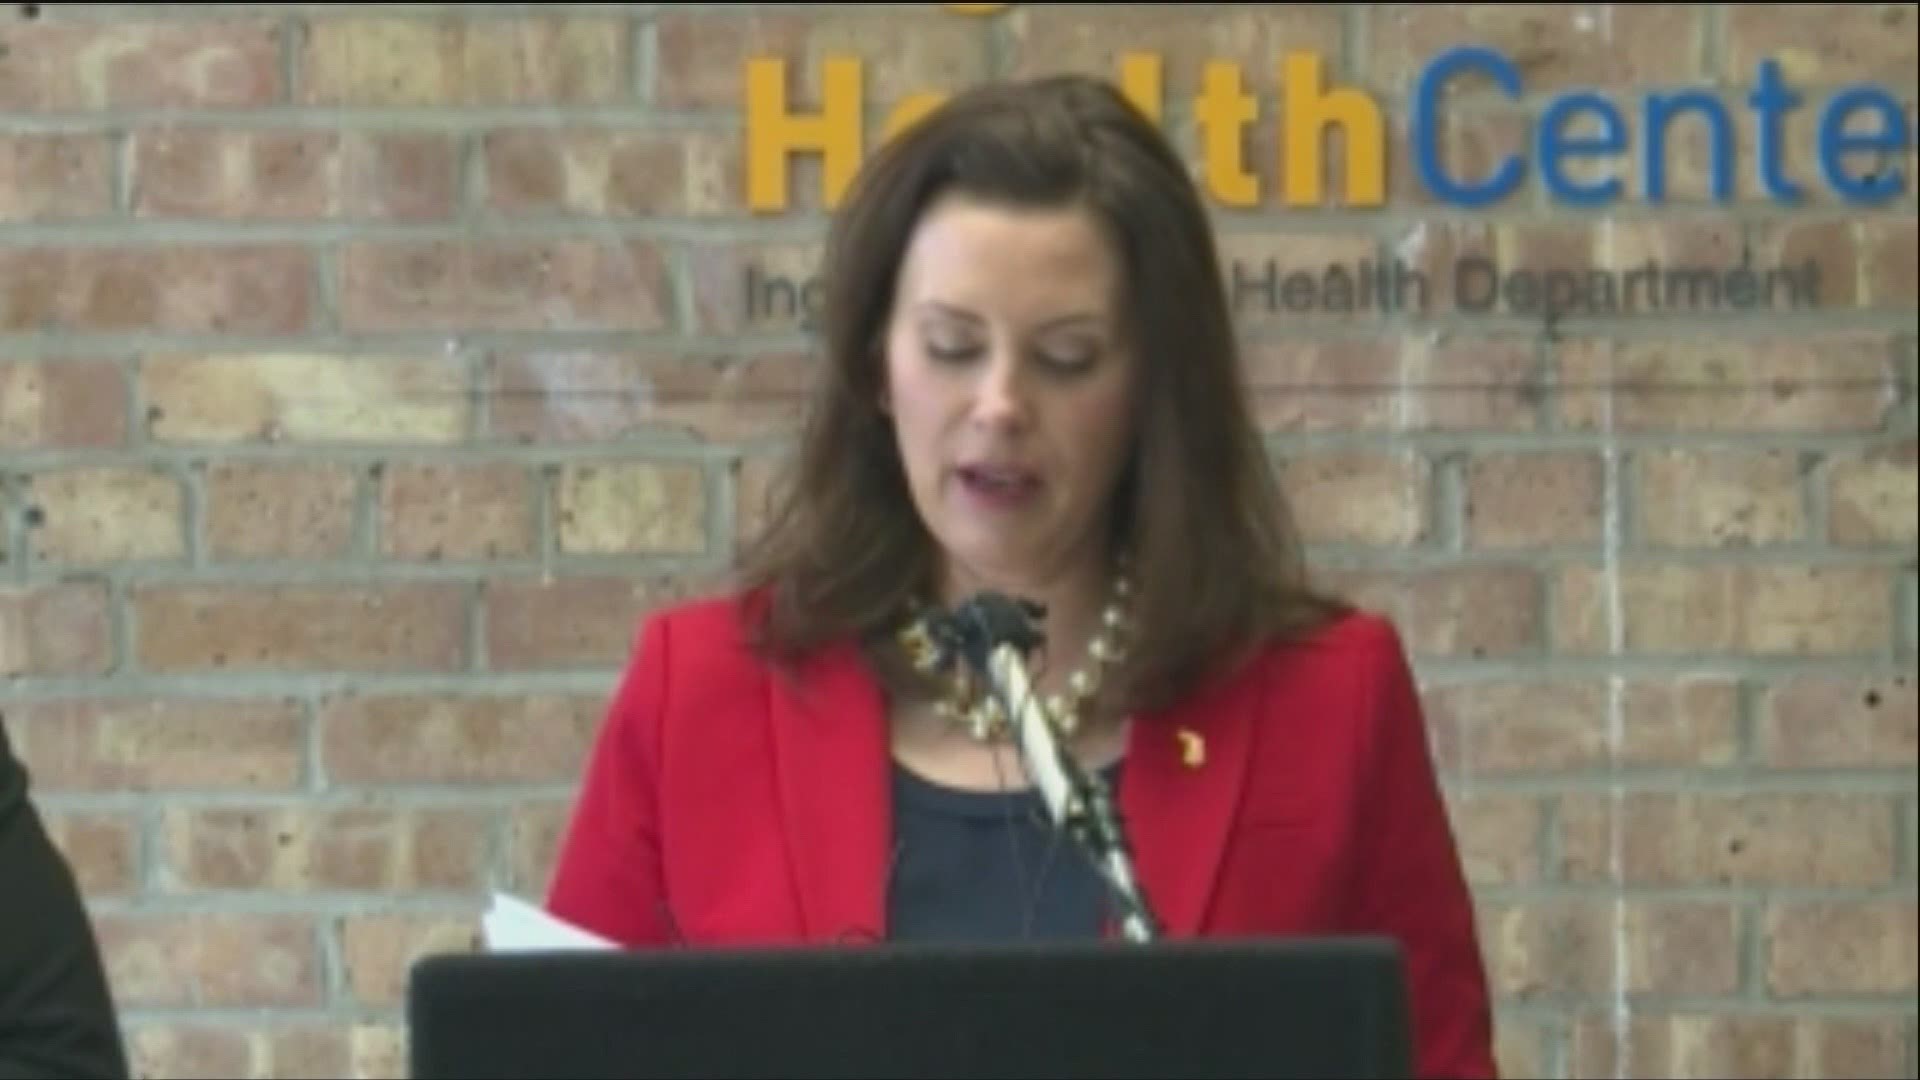 Gov. Gretchen Whitmer says the requirement will help lessen unconscious biases and improve health outcomes.